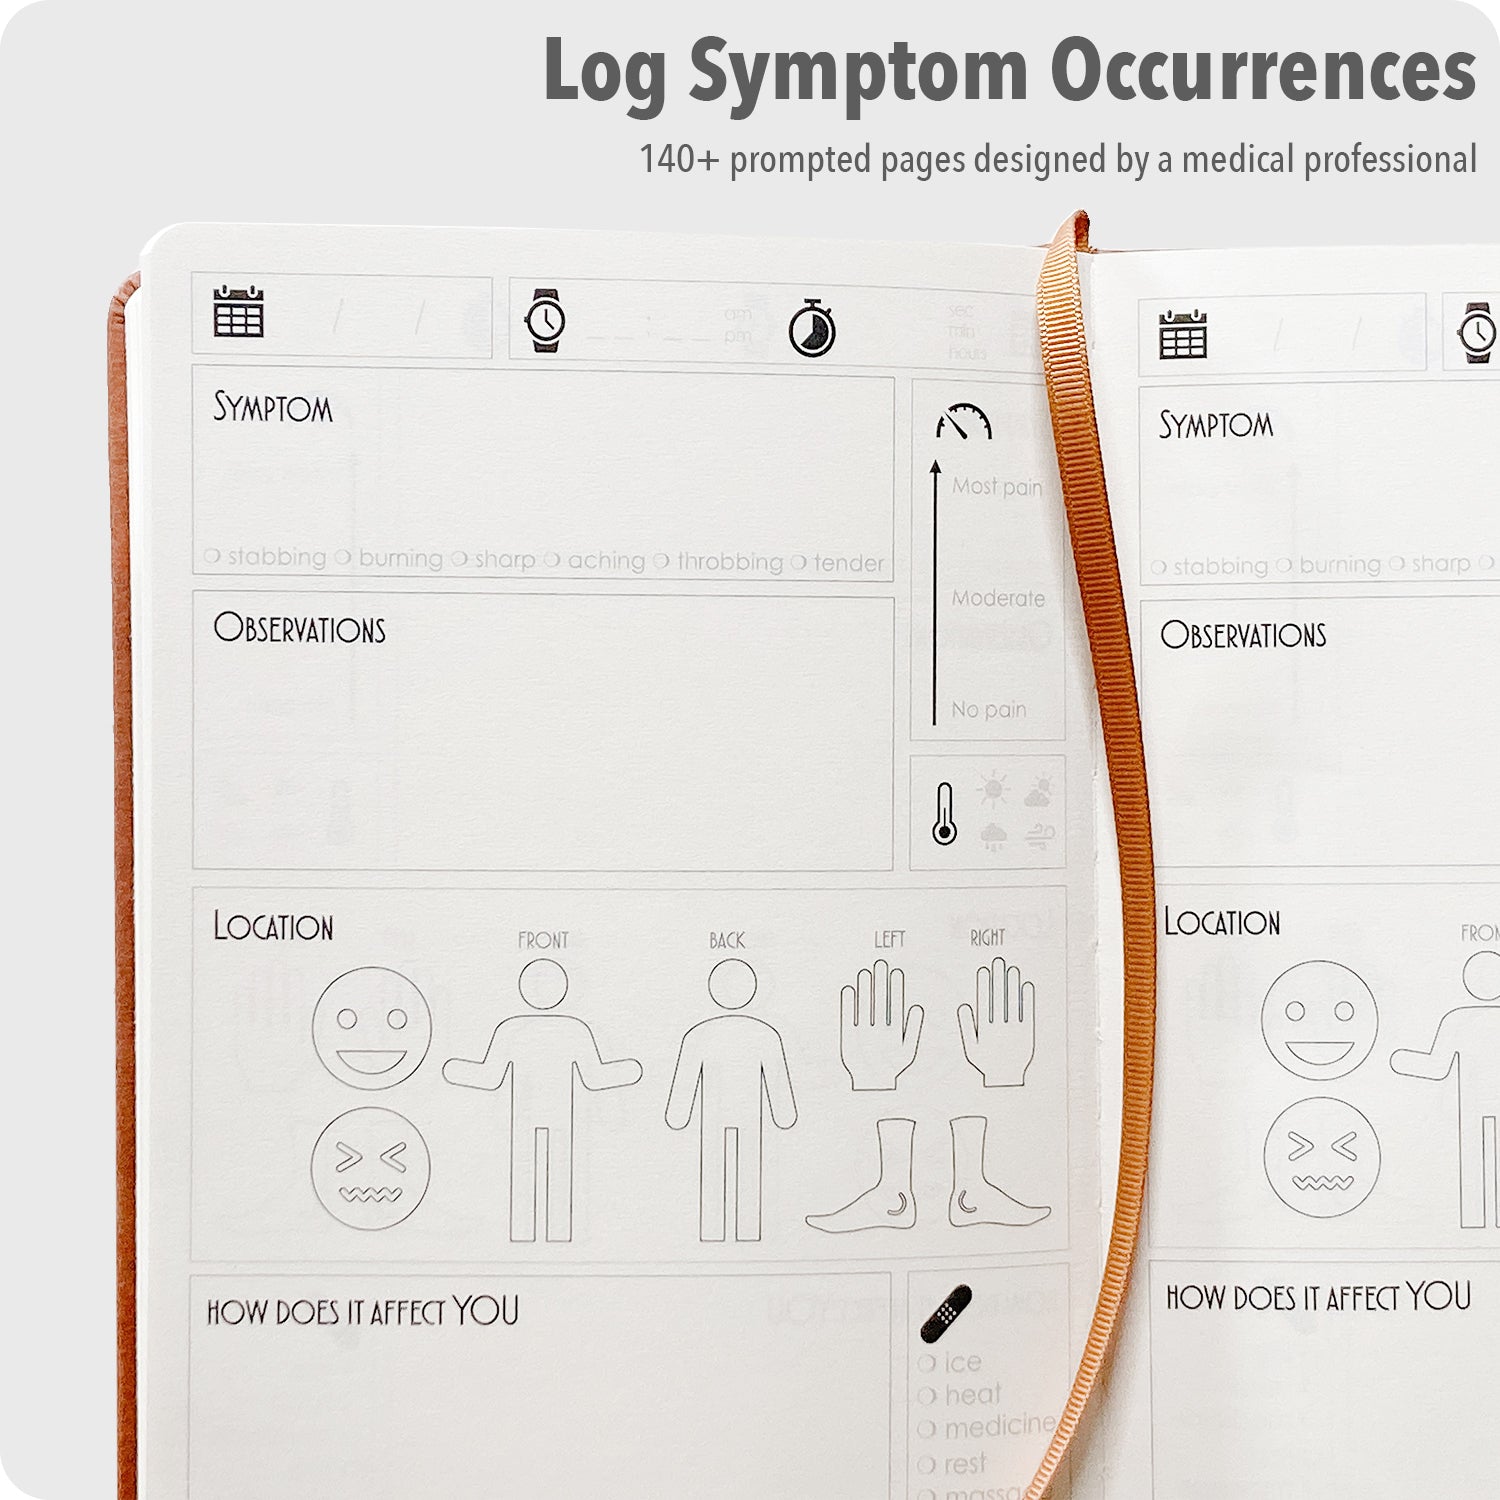 log symptom occurrences 140+ prompted pages designed by a medical profressional the symptoms log a beautifully designed high quality journal for tracking multiple symptoms